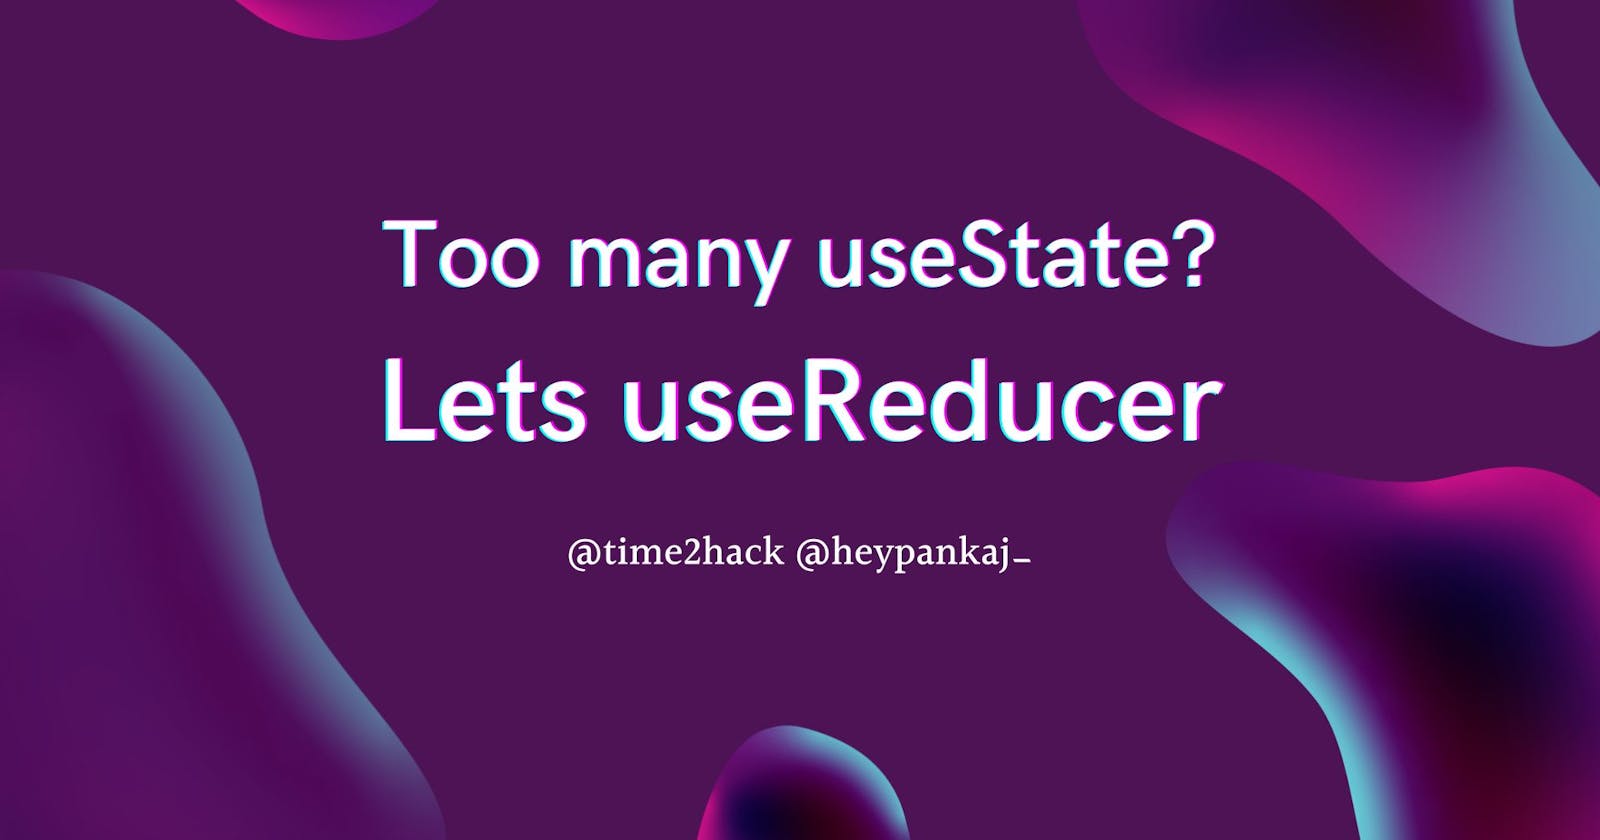 Too many useState? Let's useReducer